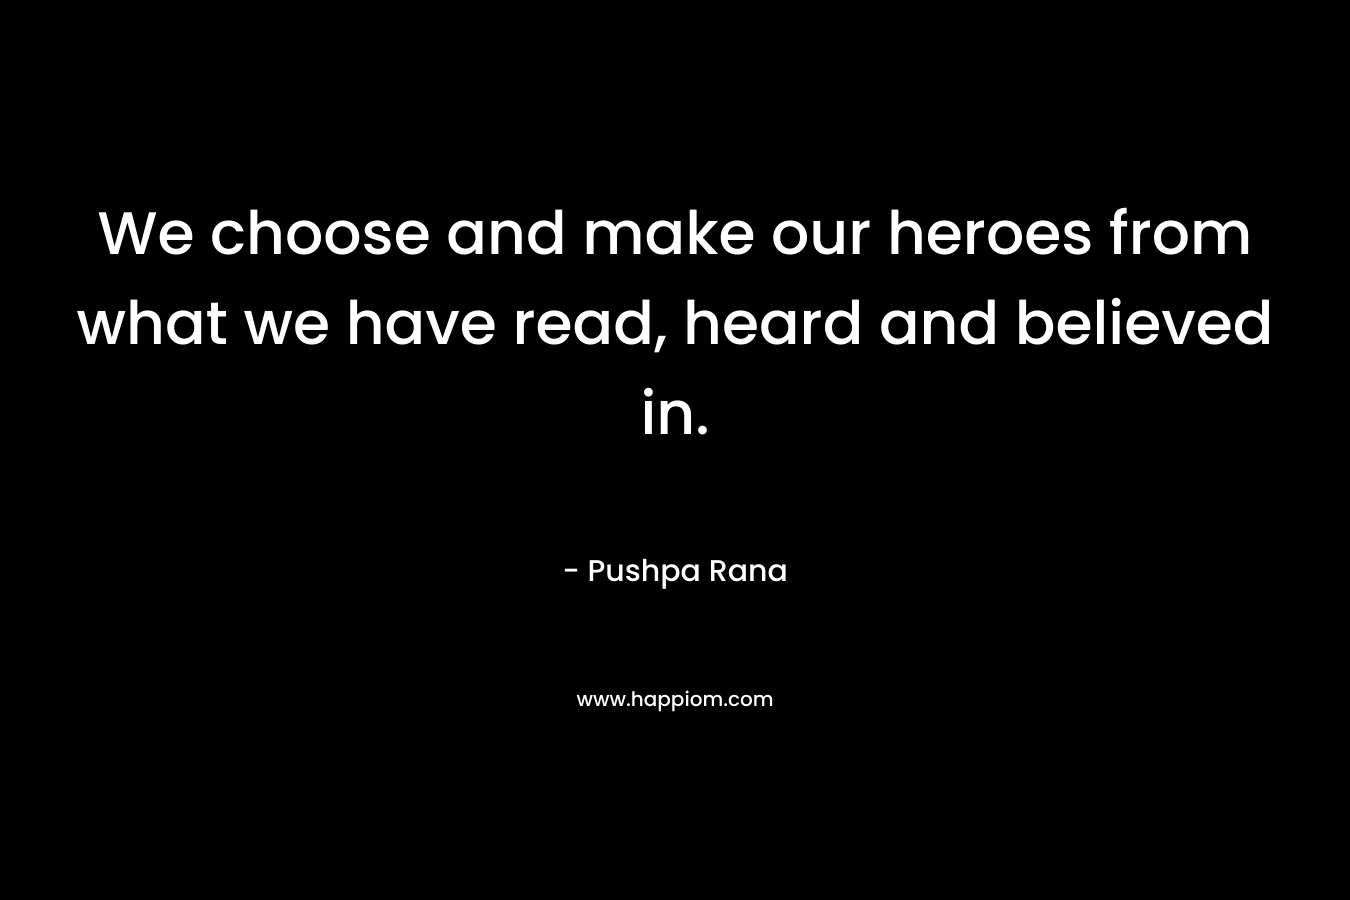 We choose and make our heroes from what we have read, heard and believed in. – Pushpa Rana